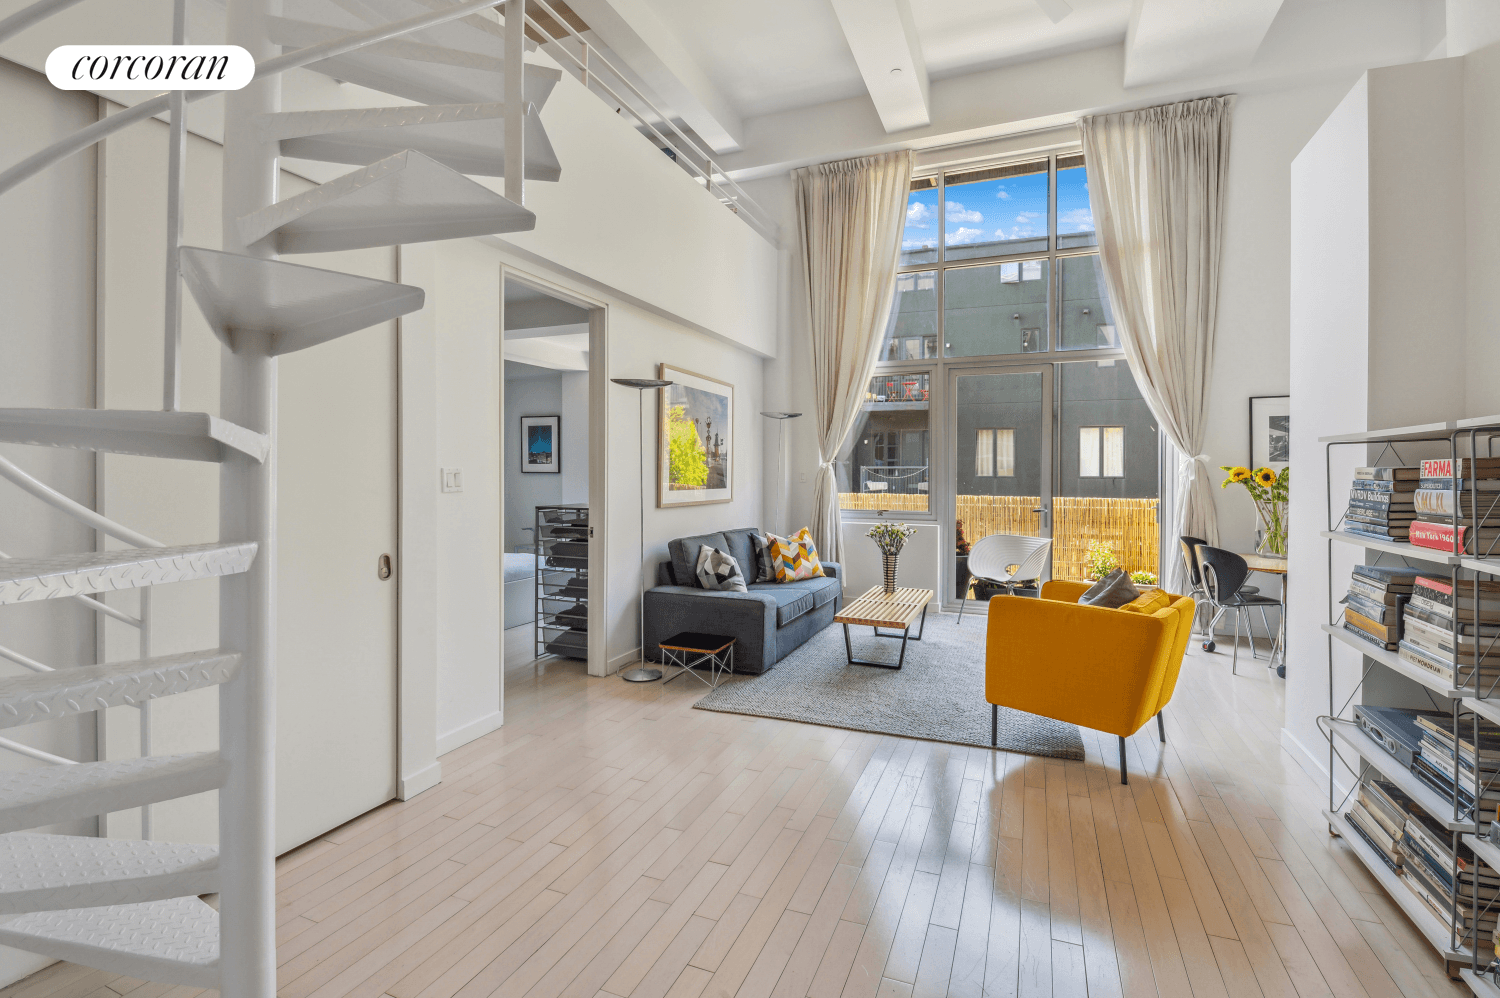 Your search for a true and authentic LOFT in Williamsburg's dynamic Northside stops here.